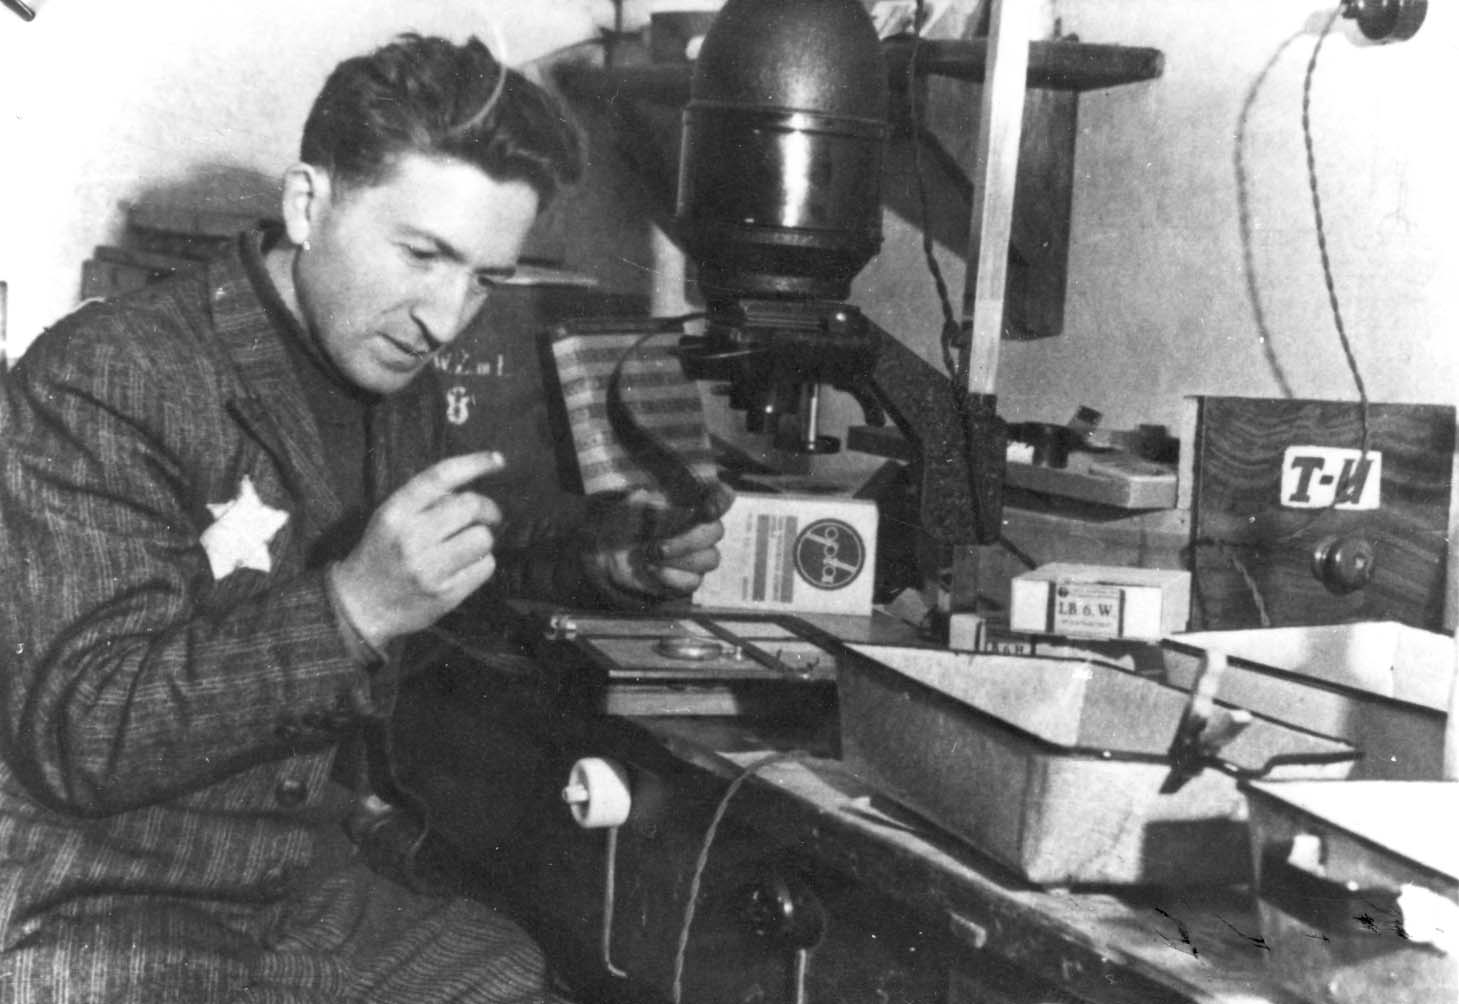 The photographer Mendel Grossman in his laboratory in the Lodz Ghetto, Poland